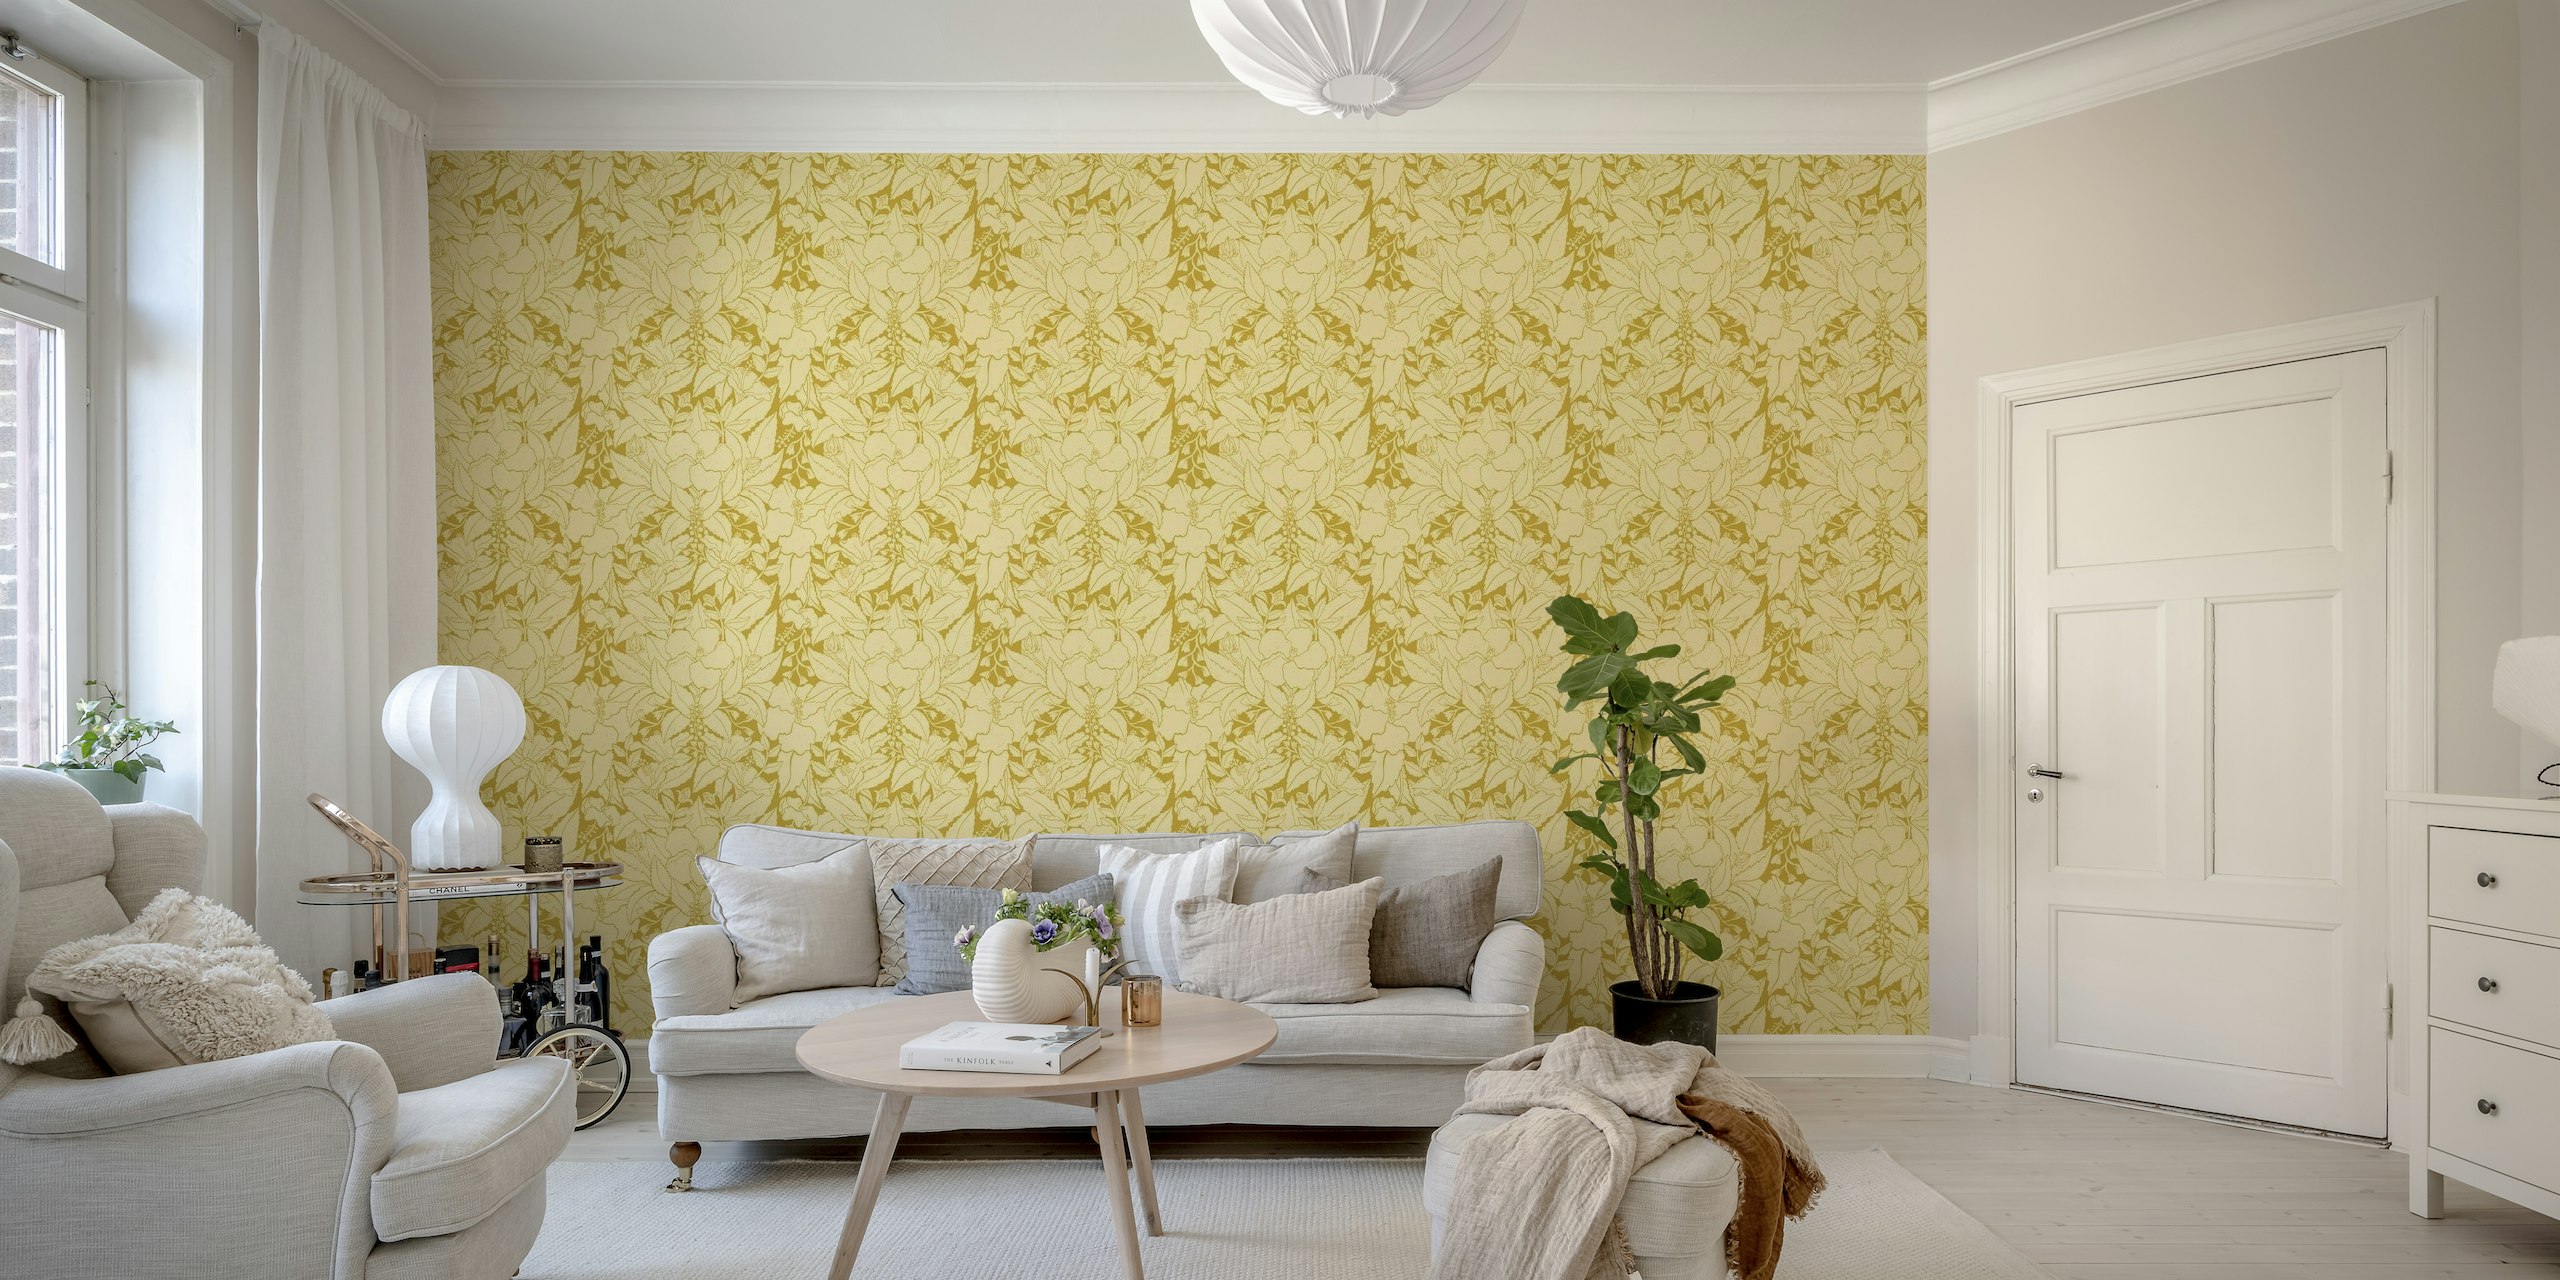 Yellow hibiscus floral damask pattern wall mural